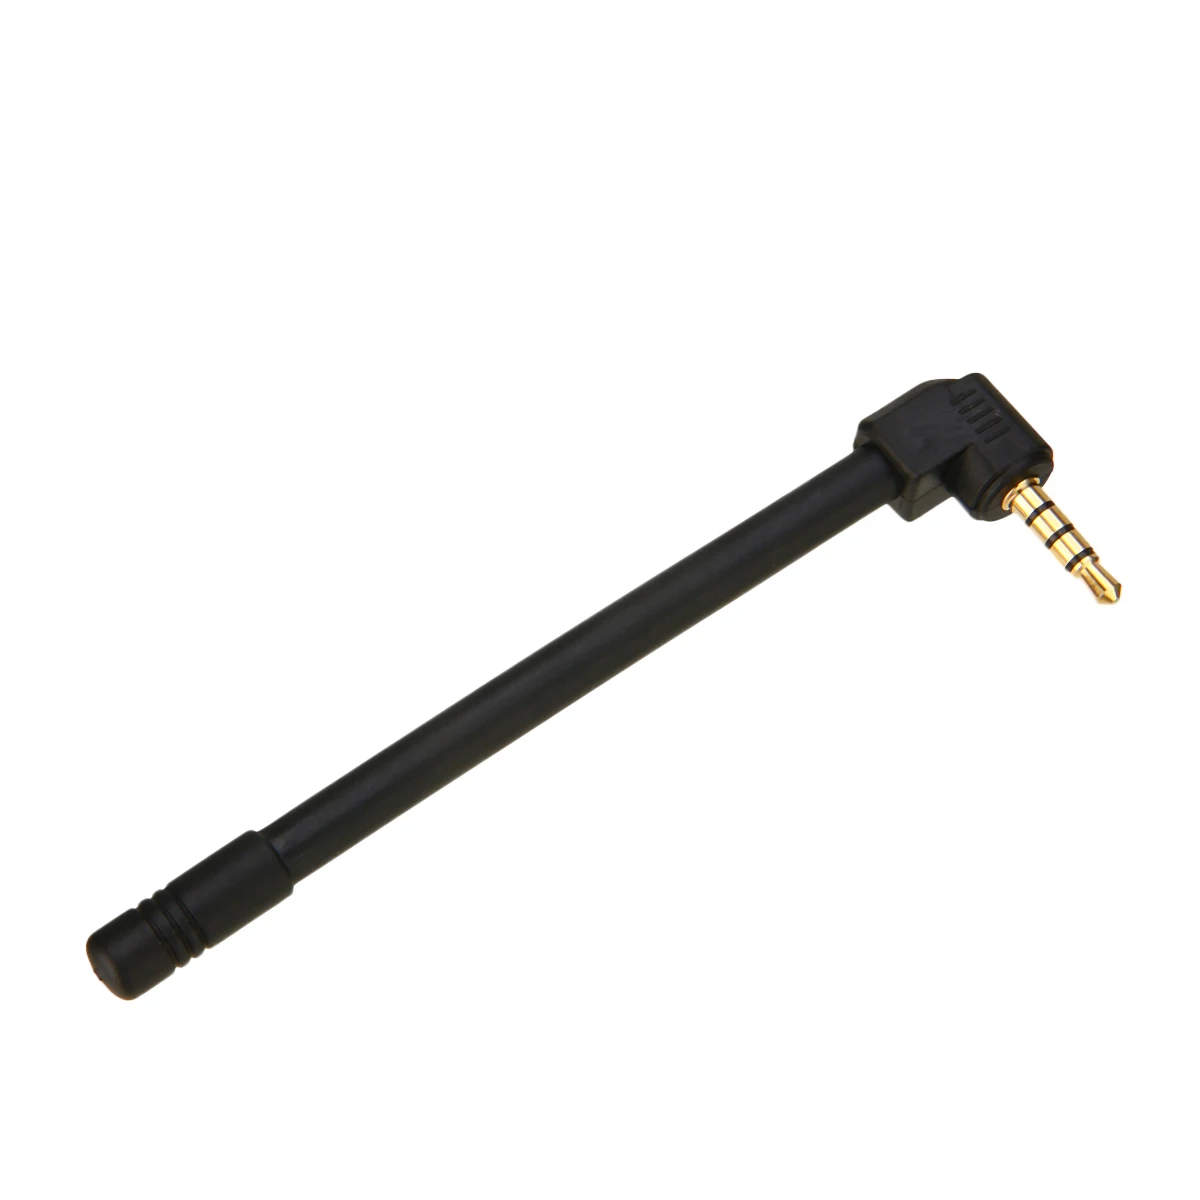 Antenna New 3.5mm Male Cell Phone External Wireless Antenna Signal Strengthen Booster 5DBI For GPS TV Mobile Phone